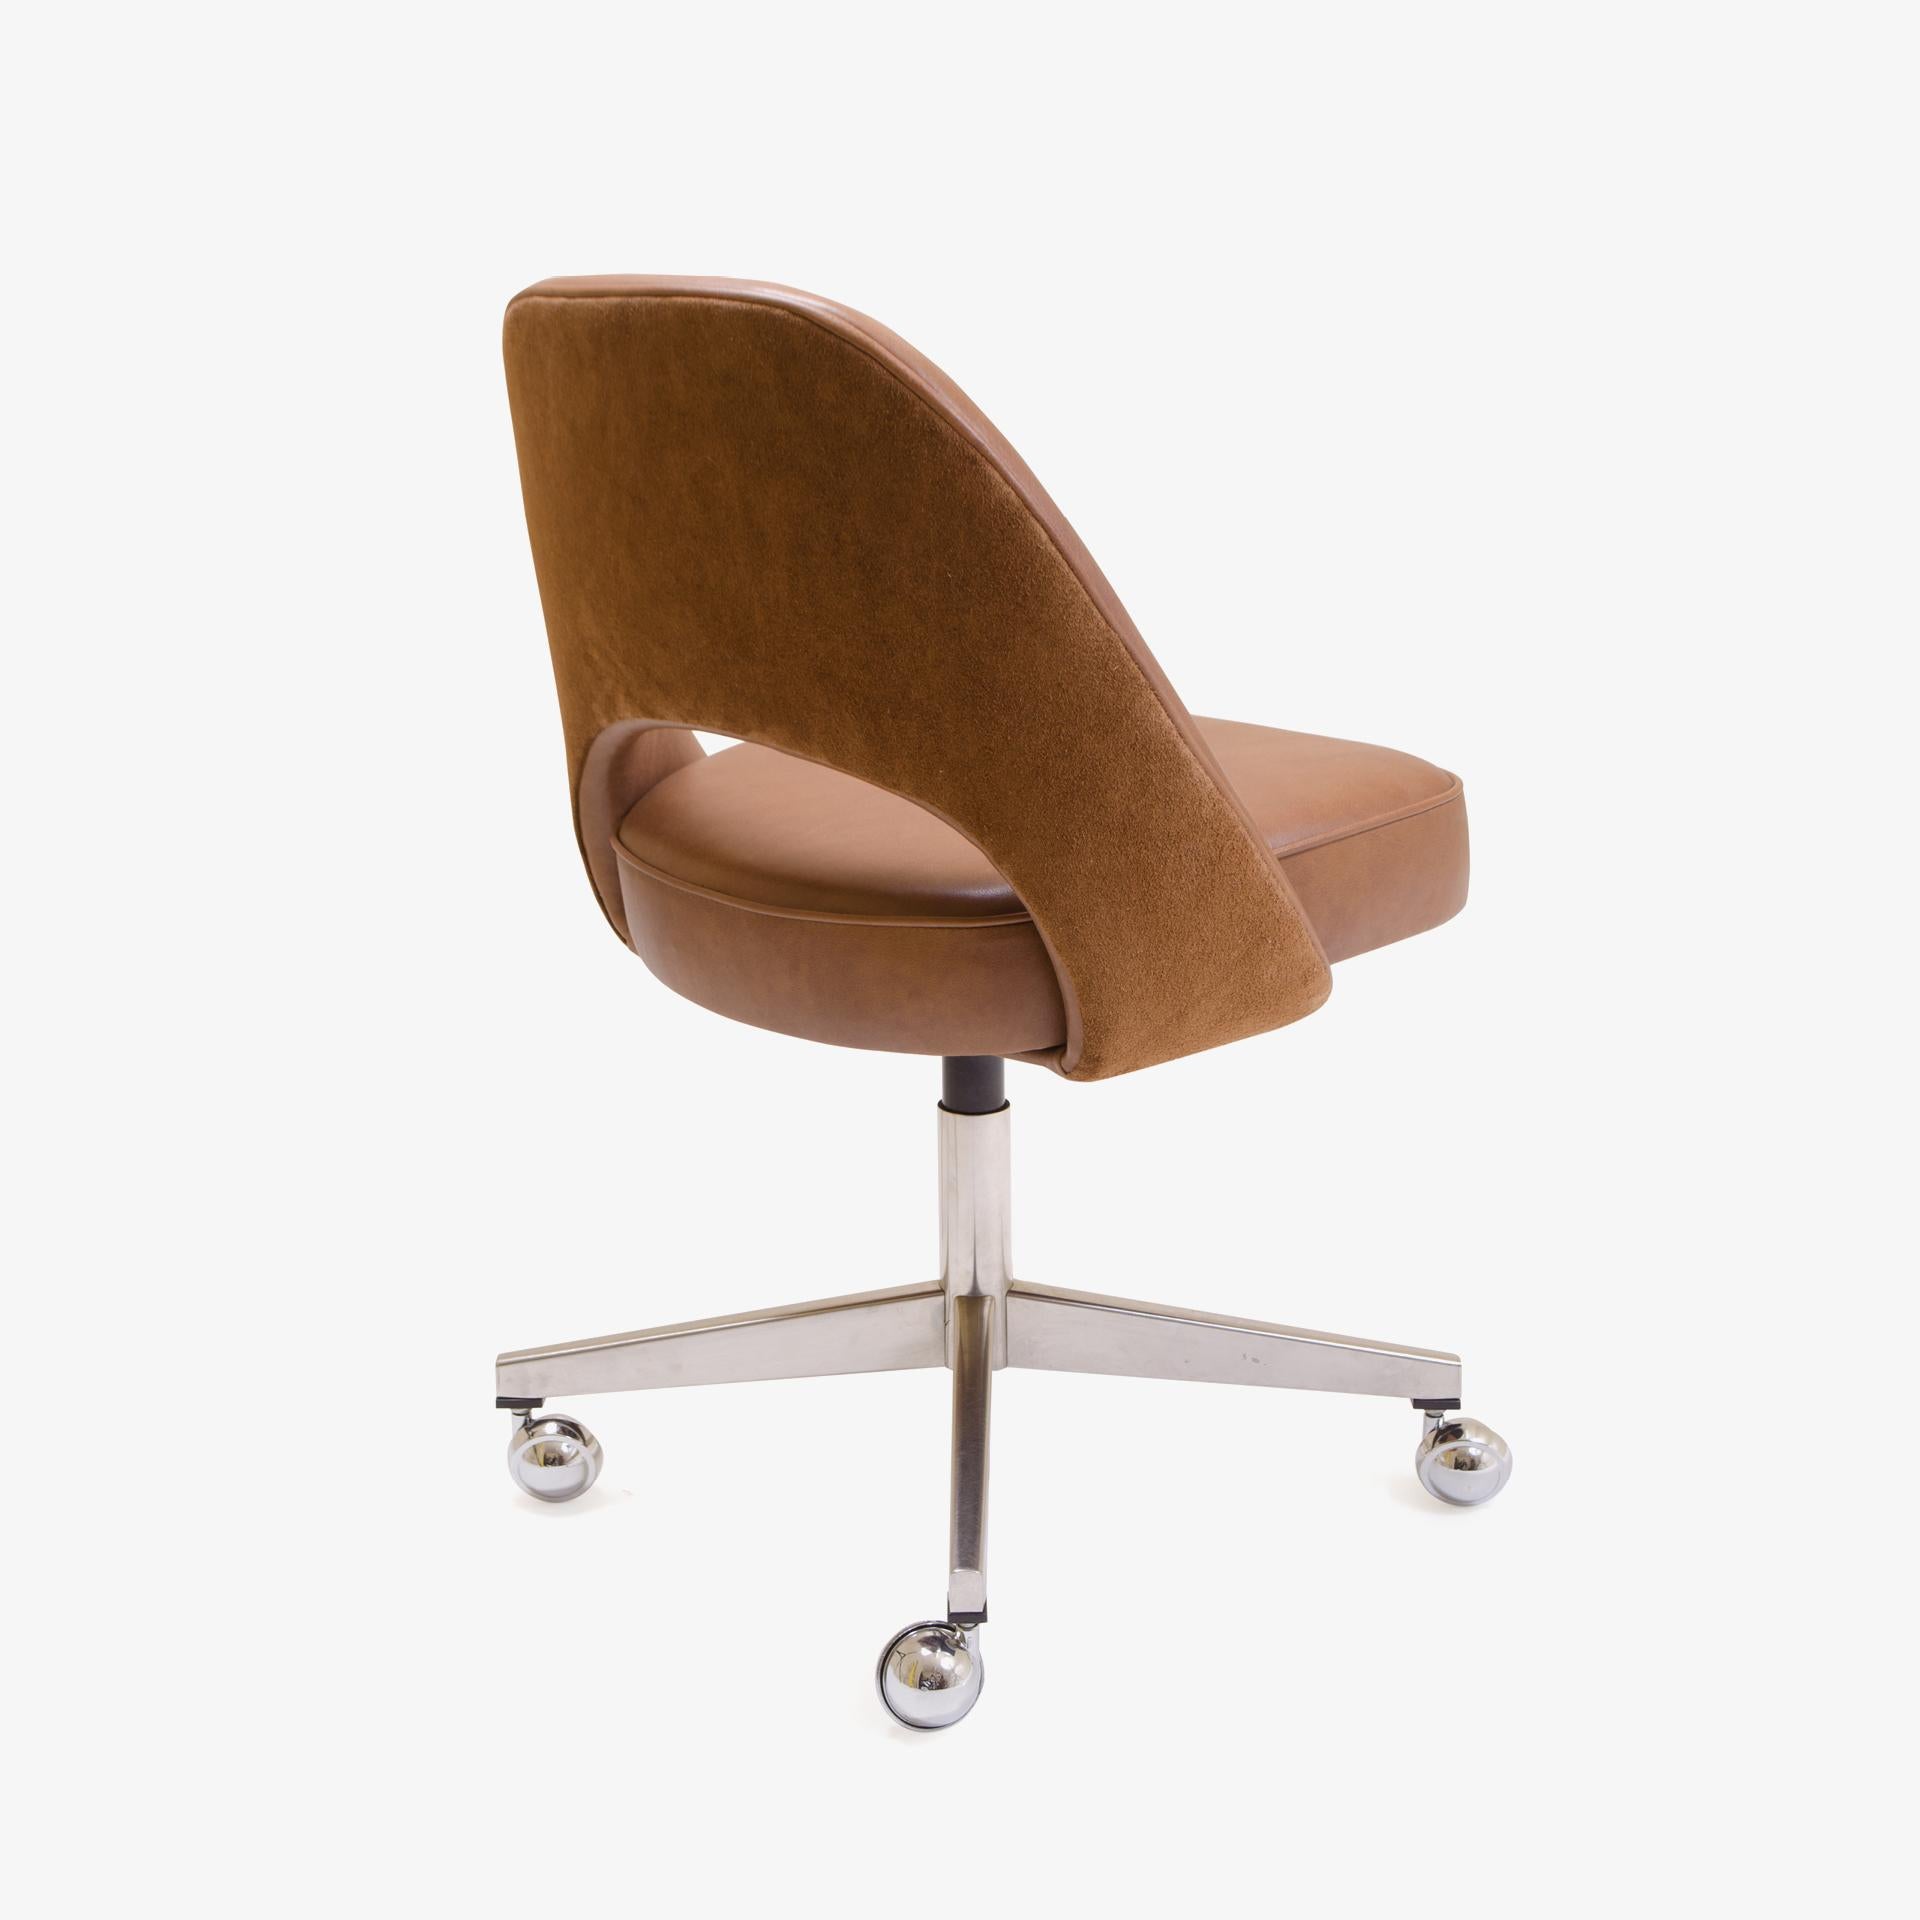 Mid-Century Modern Saarinen Executive Armless Chair in Leather and Suede, Vintage Swivel Base For Sale